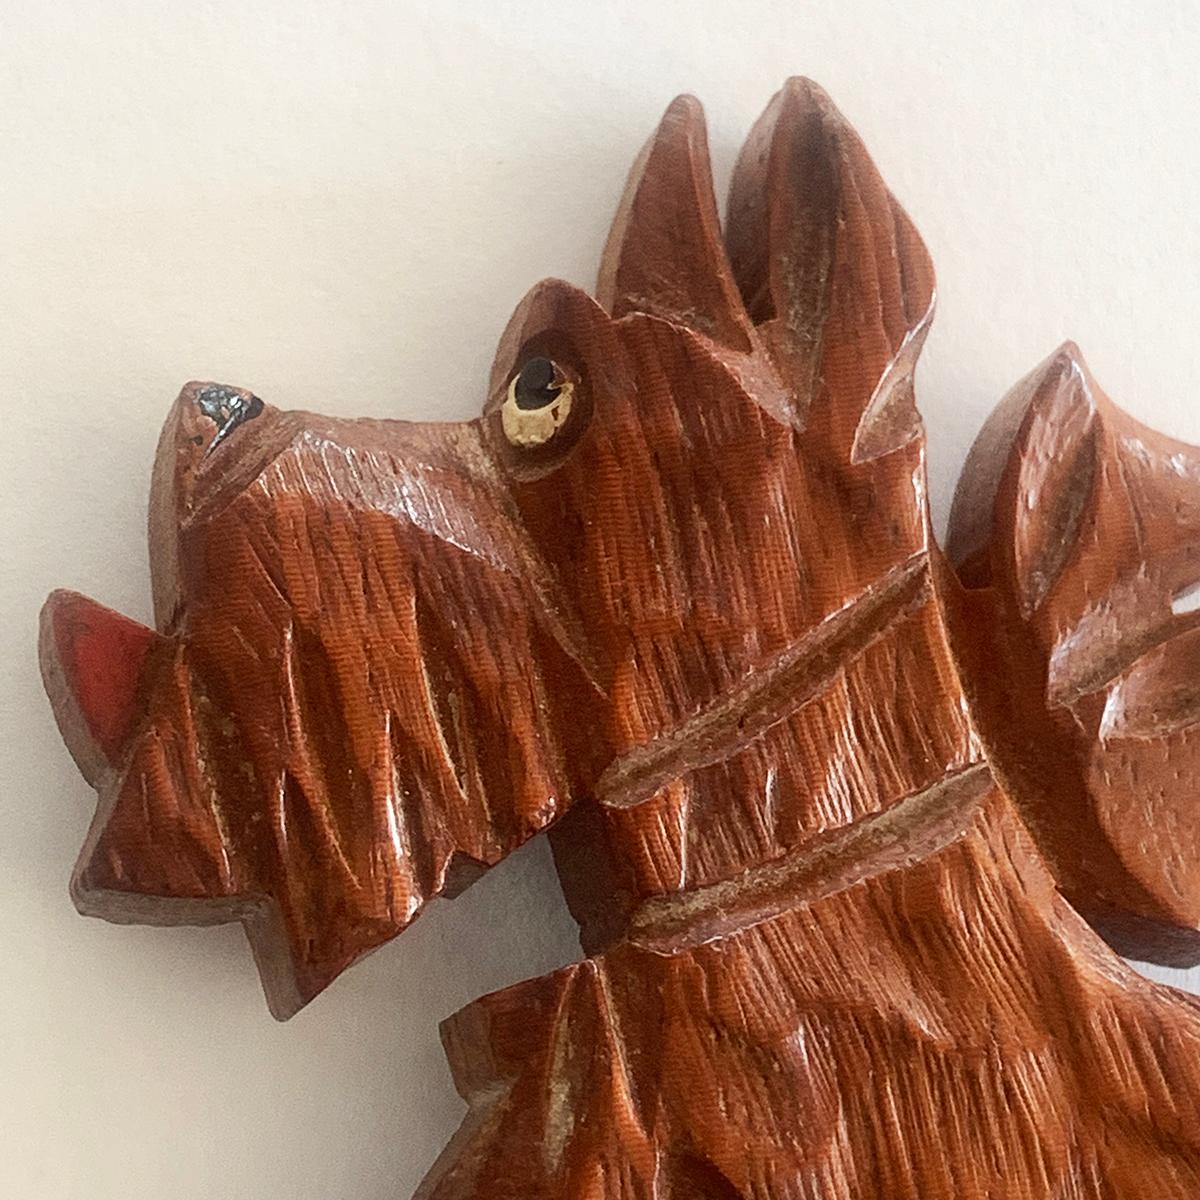 Art Deco Brooch Carved Wooden Scottish Terrier, with details painted for tongue, nose and eye. Finely detailed, with collar and bow to neck. The rear clasp has the old French “Roll-over” safety clasp in excellent condition. A lovely piece of comedy,